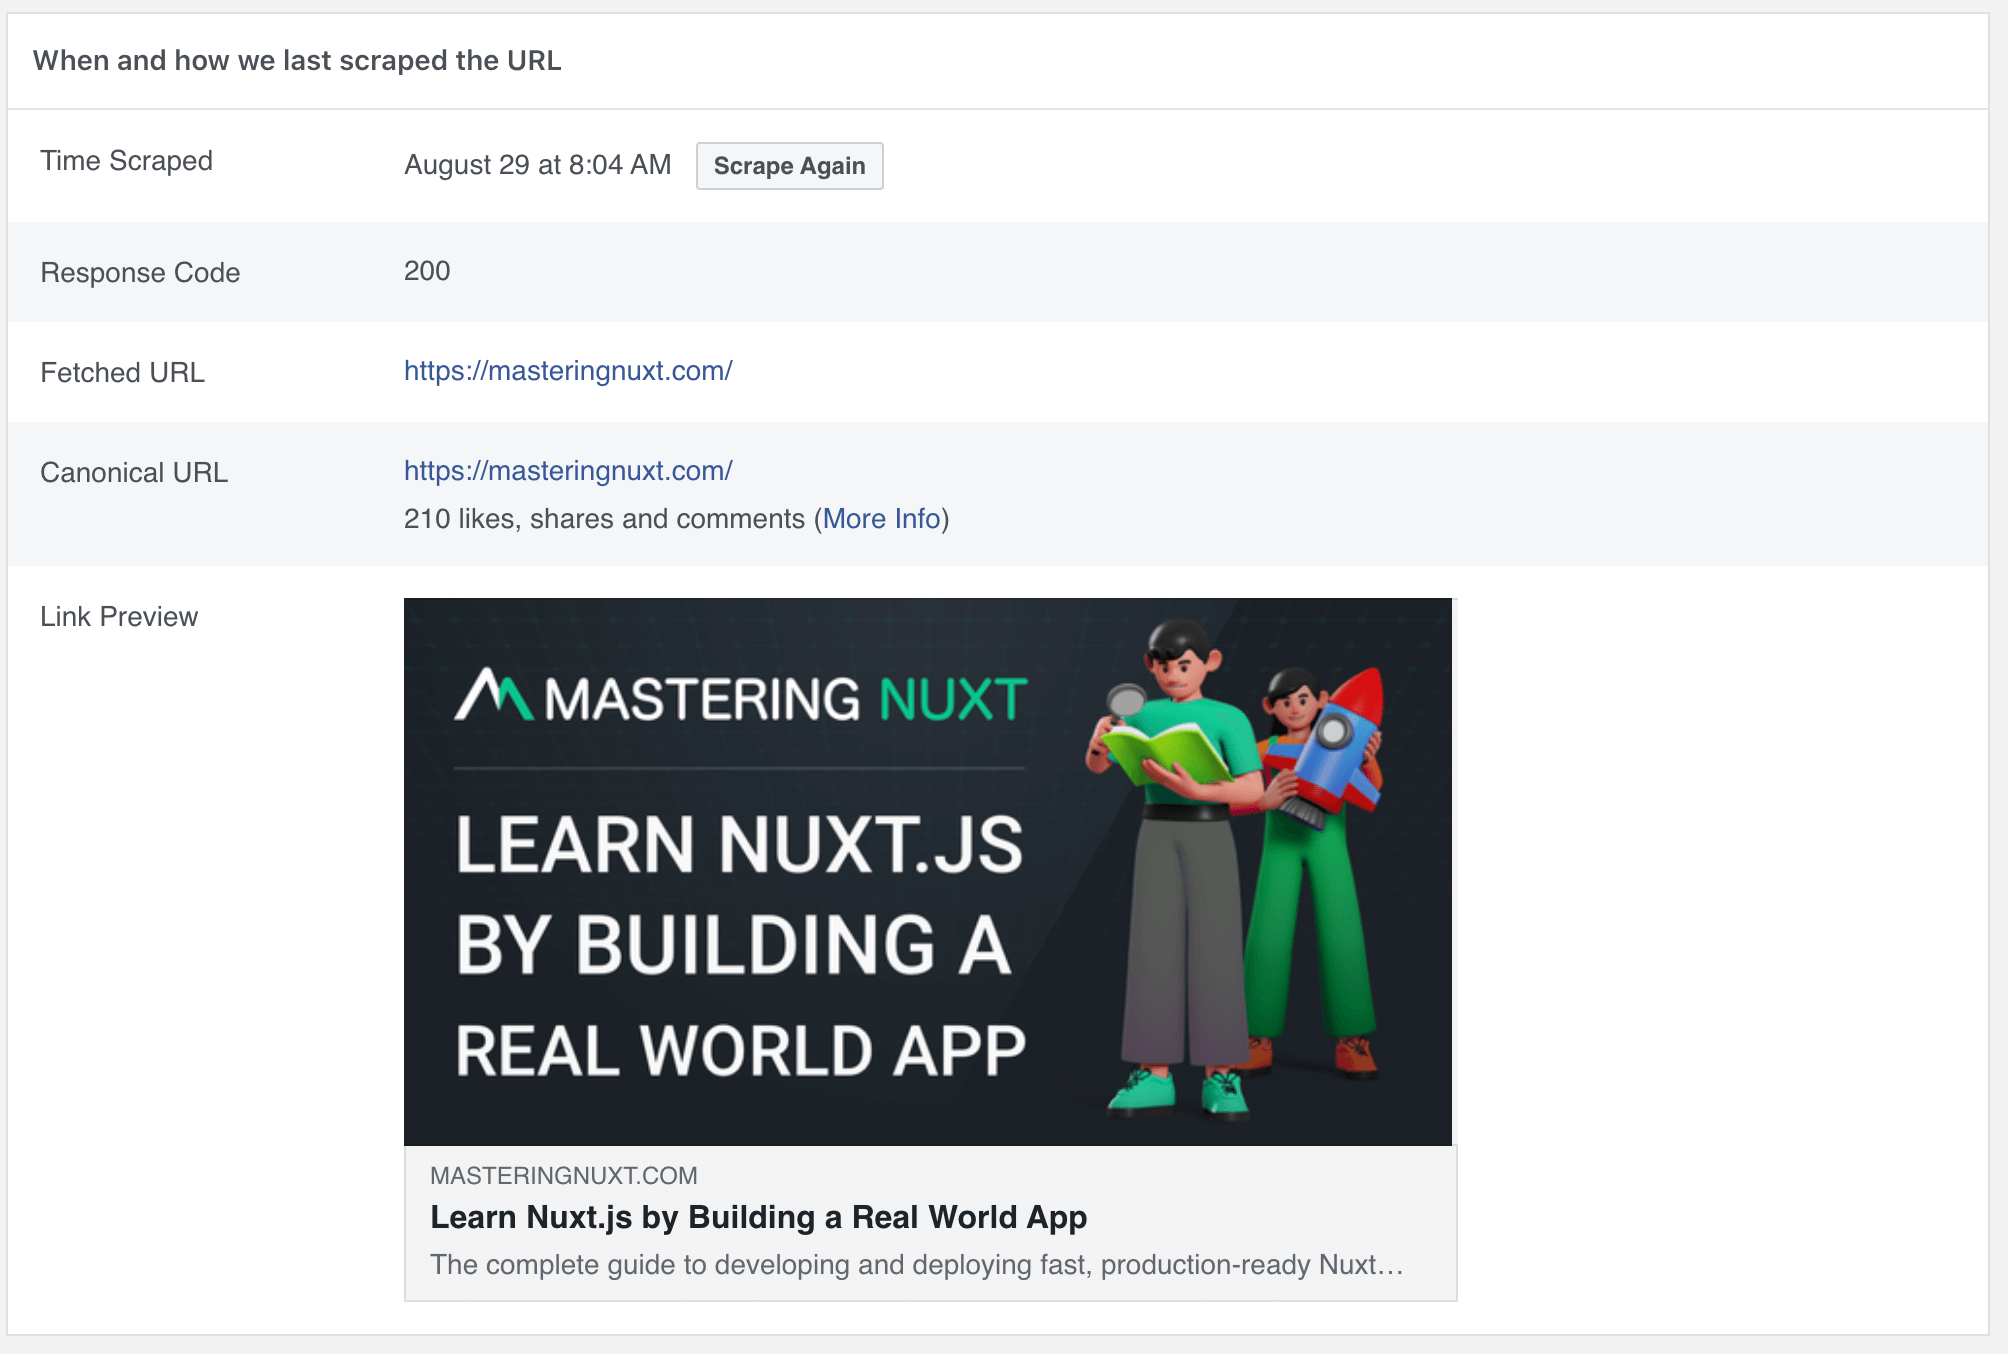 Getting Social With Nuxt